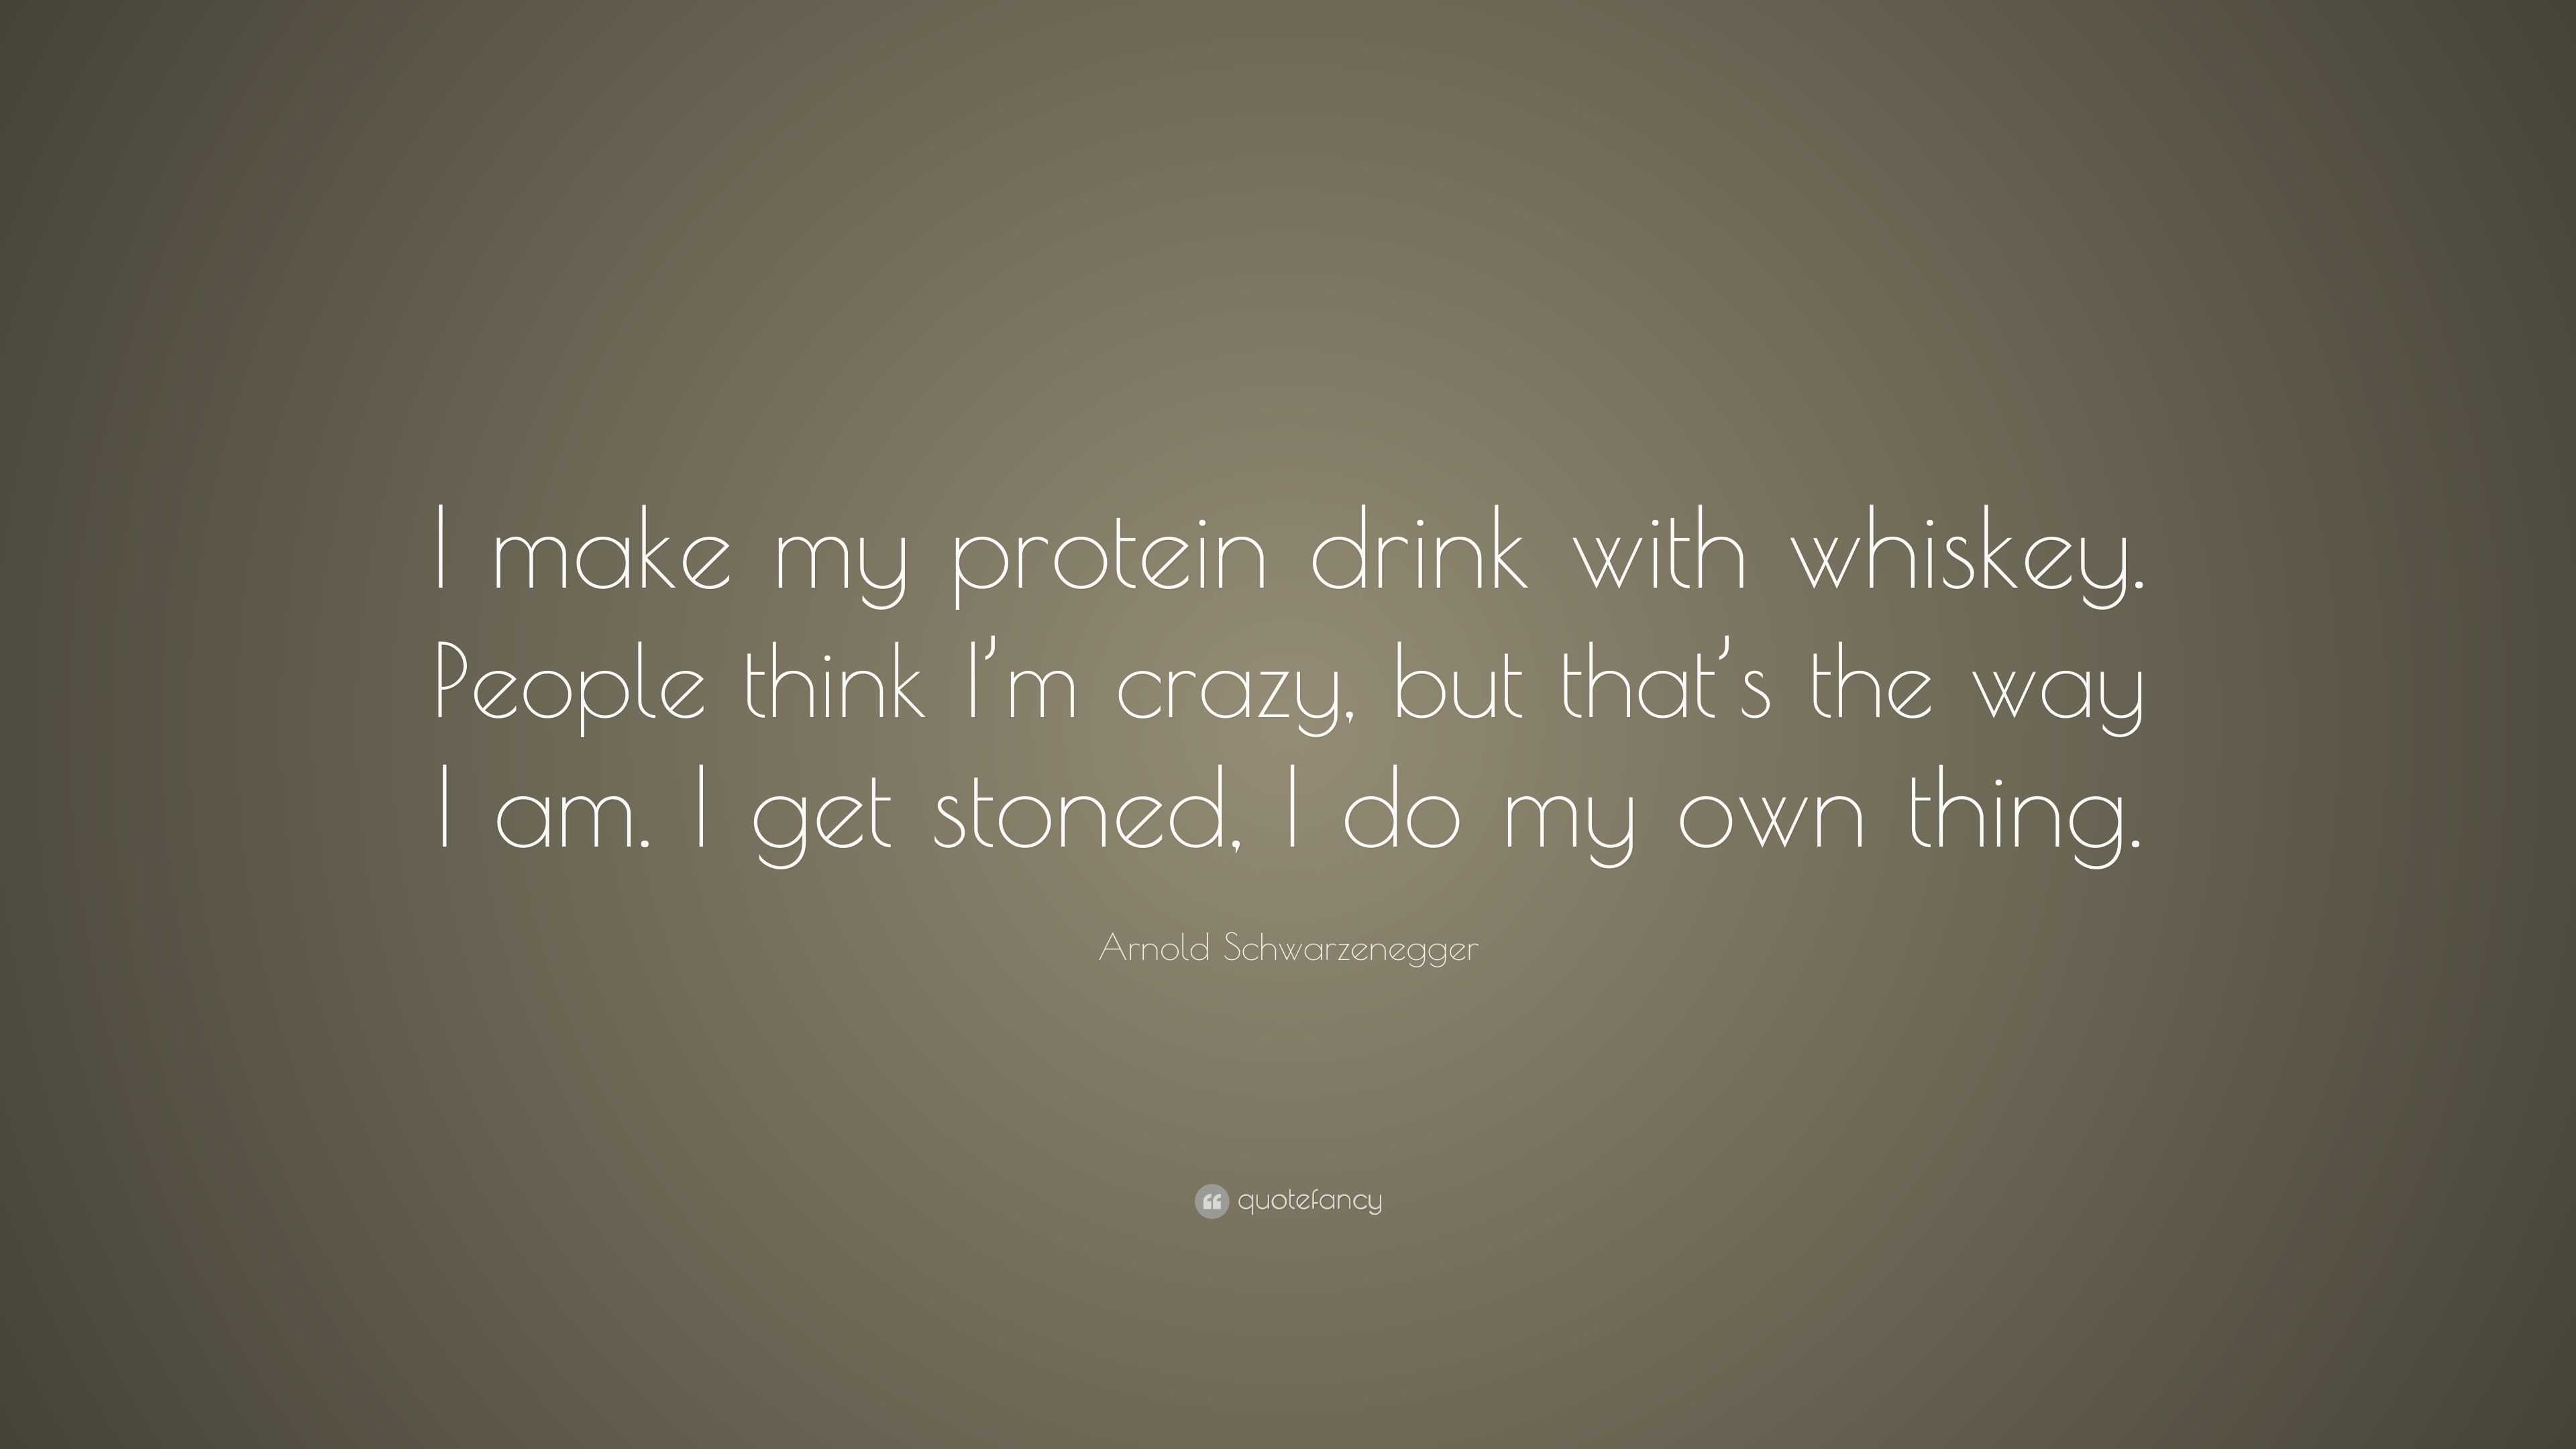 https://quotefancy.com/media/wallpaper/3840x2160/2100001-Arnold-Schwarzenegger-Quote-I-make-my-protein-drink-with-whiskey.jpg